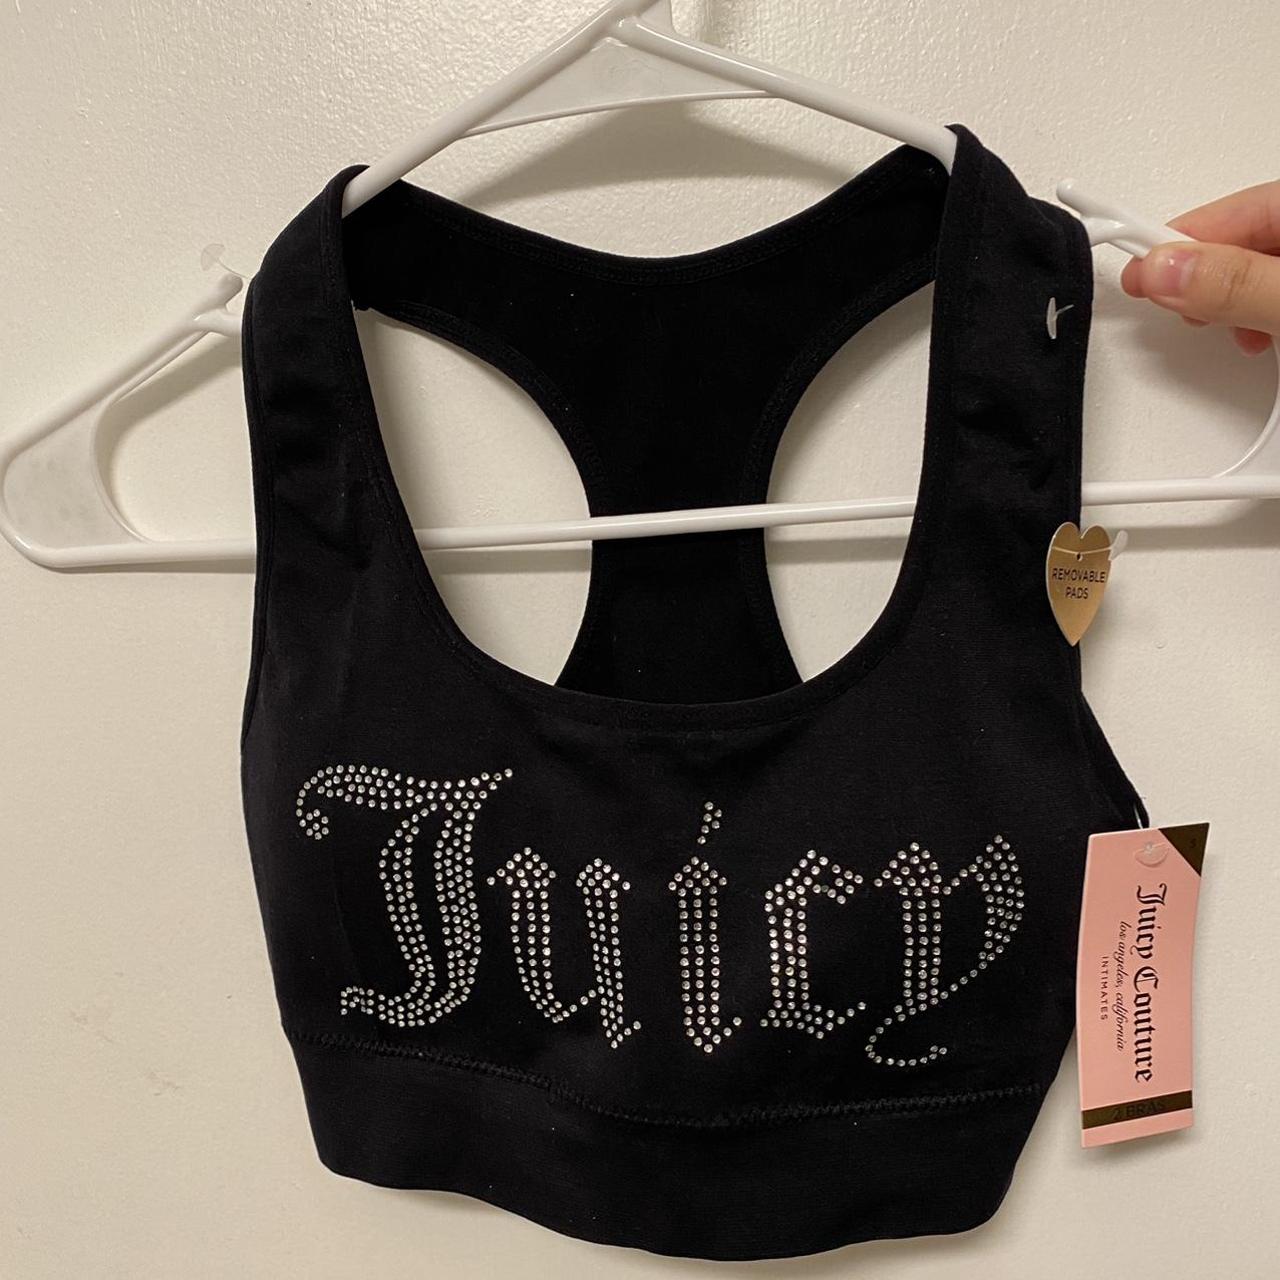 Juicy Couture Sports Bra